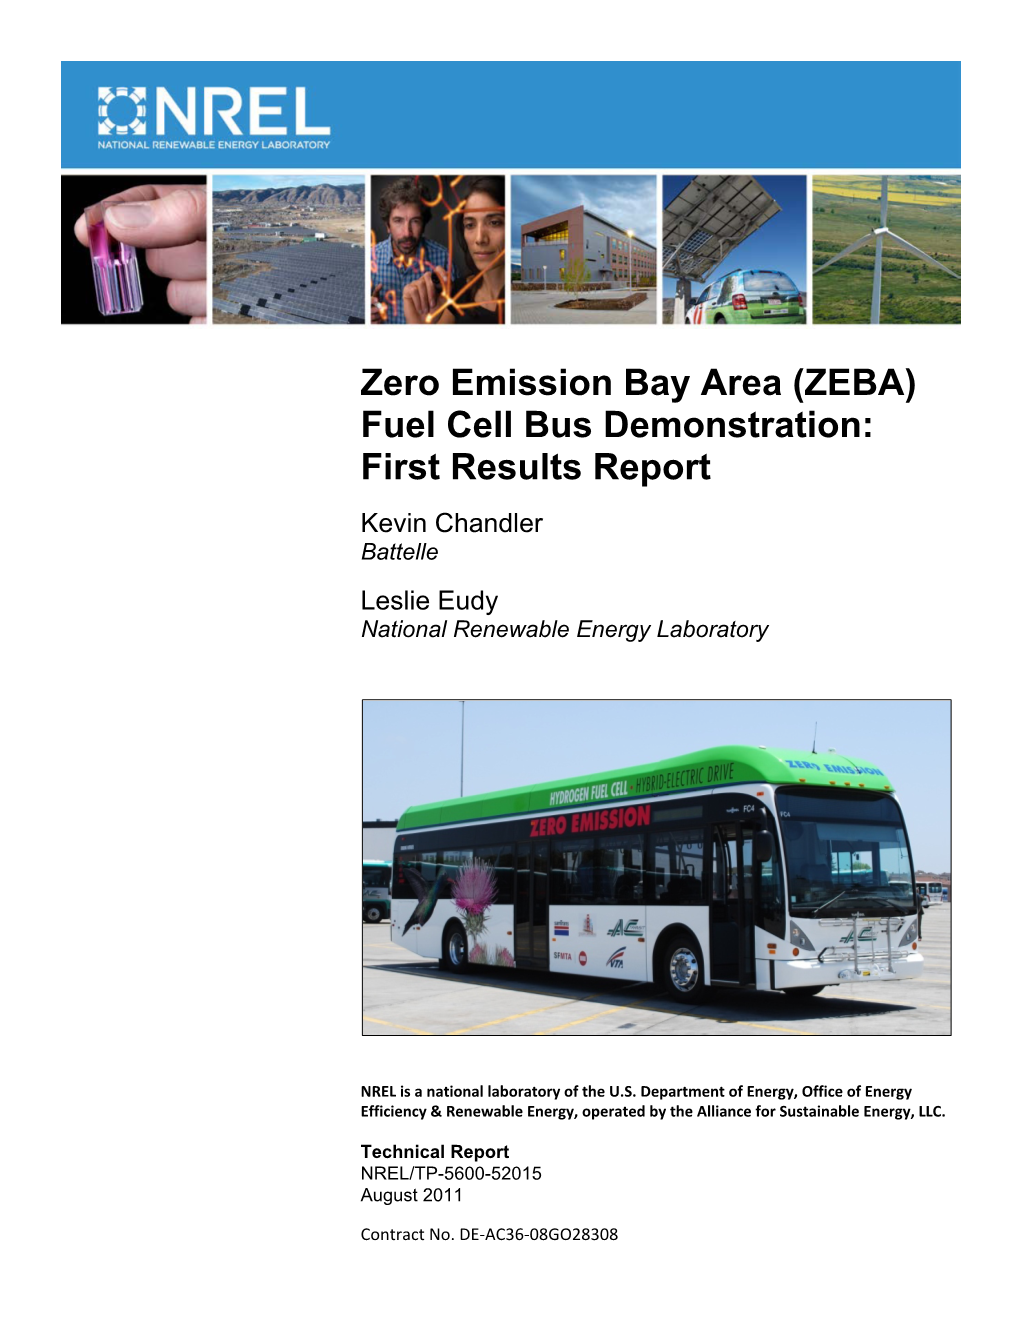 (ZEBA) Fuel Cell Bus Demonstration: First Results Report Kevin Chandler Battelle Leslie Eudy National Renewable Energy Laboratory